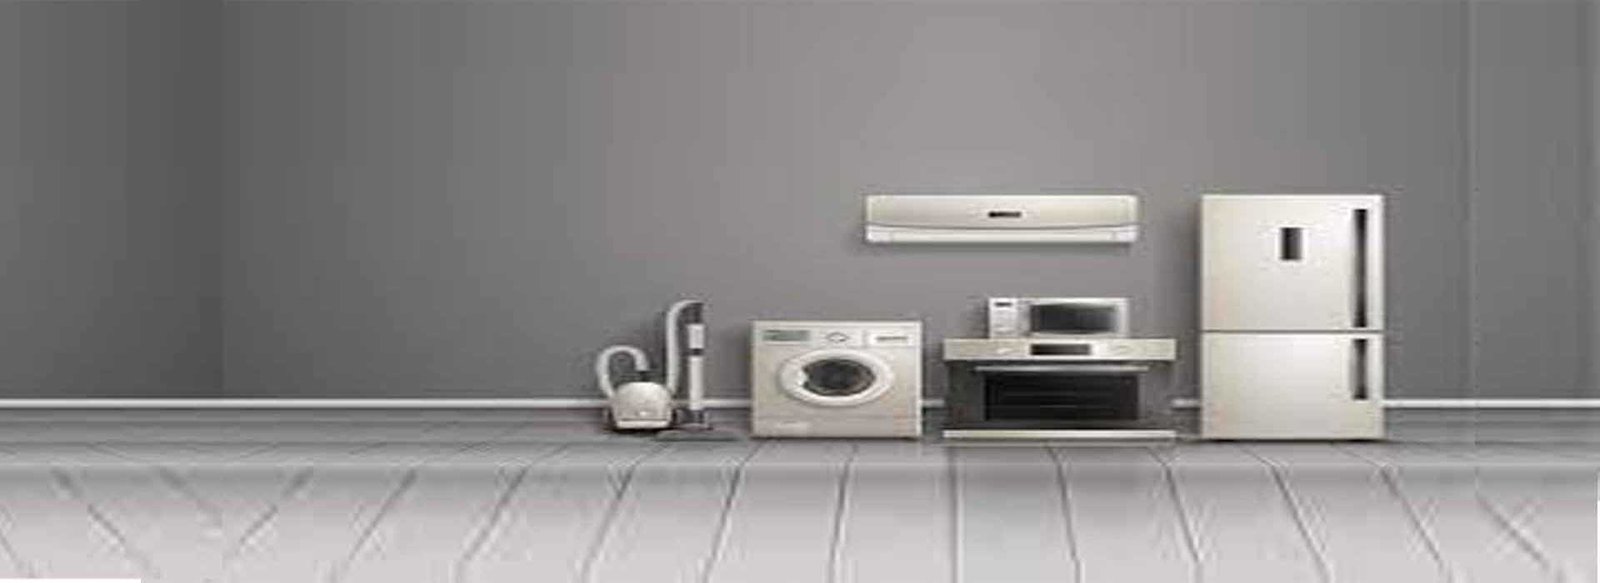 Home Appliances Repair & Security System